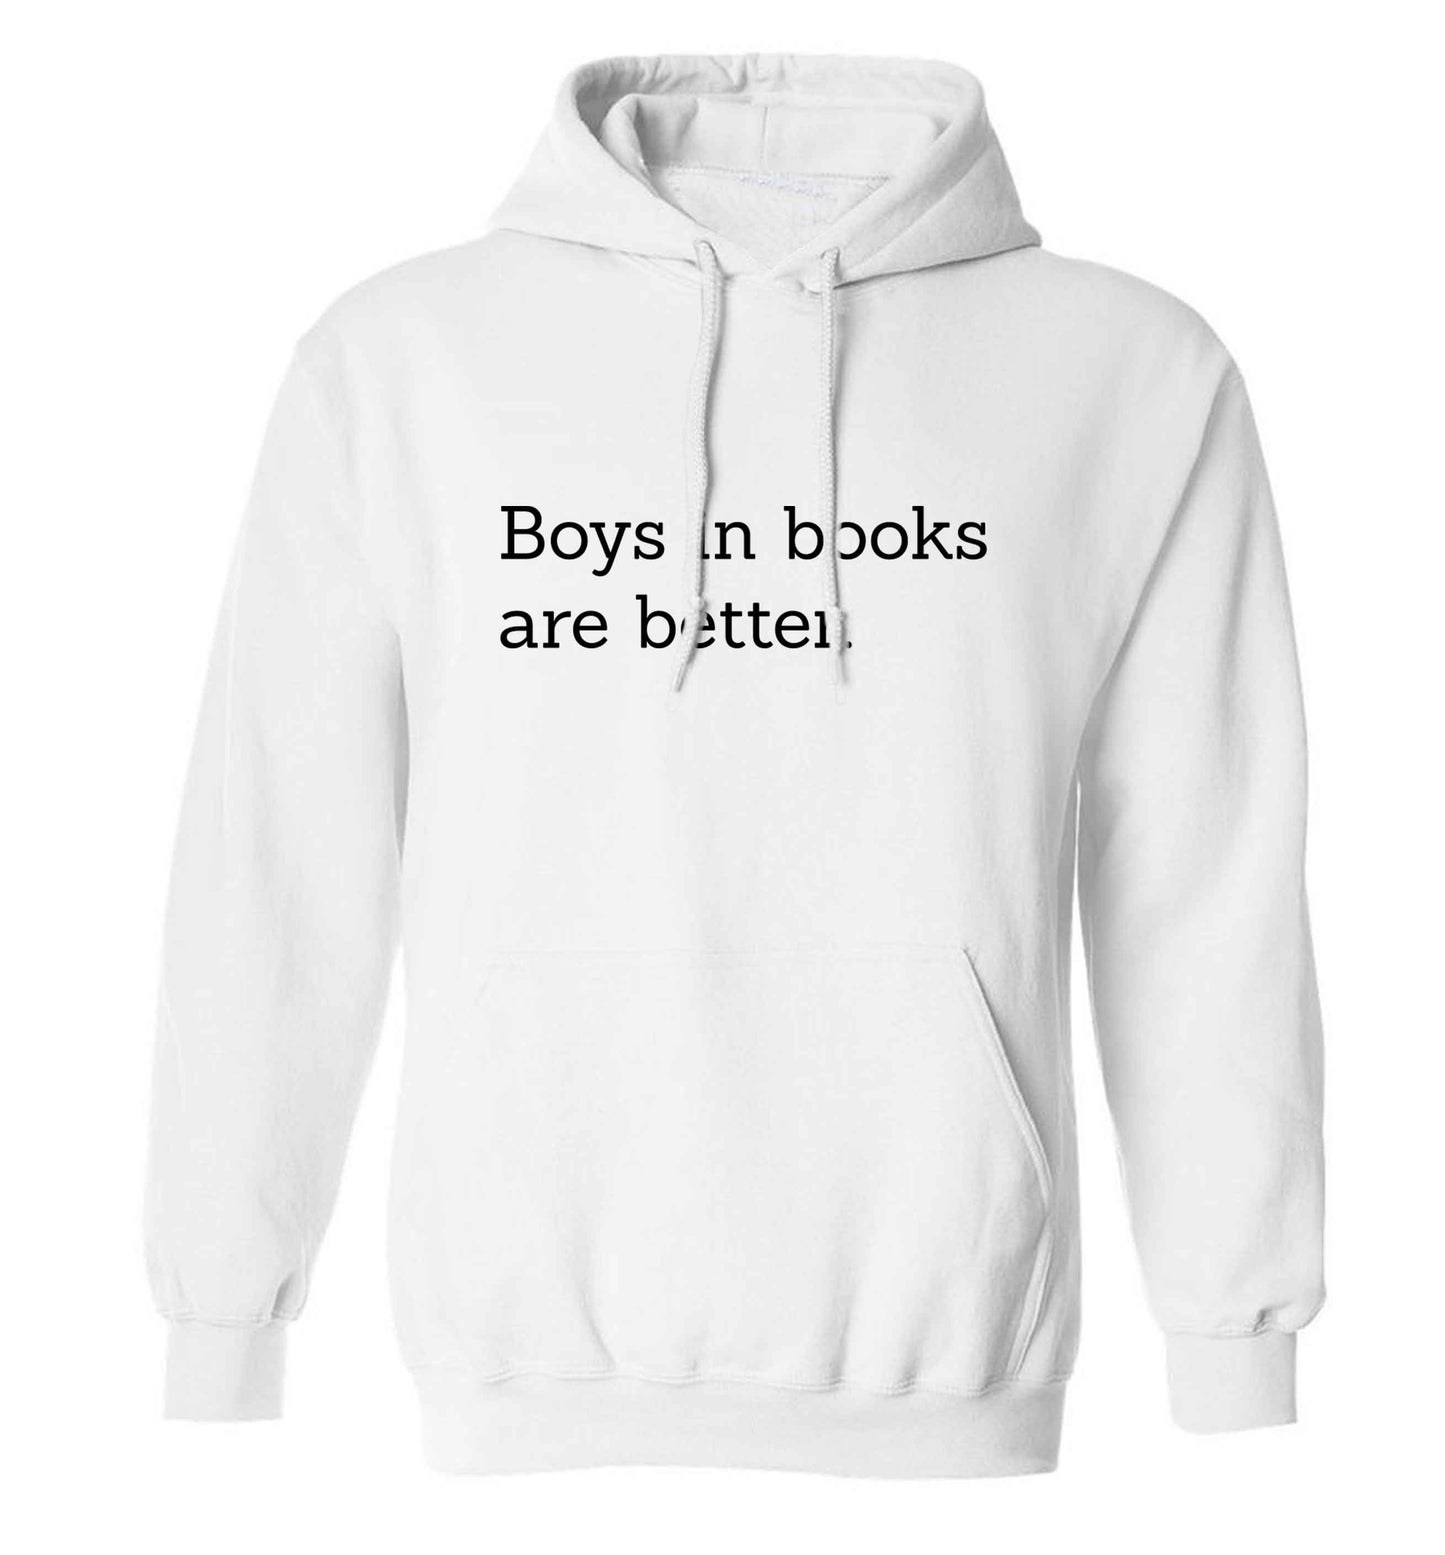 Boys in books are better adults unisex white hoodie 2XL